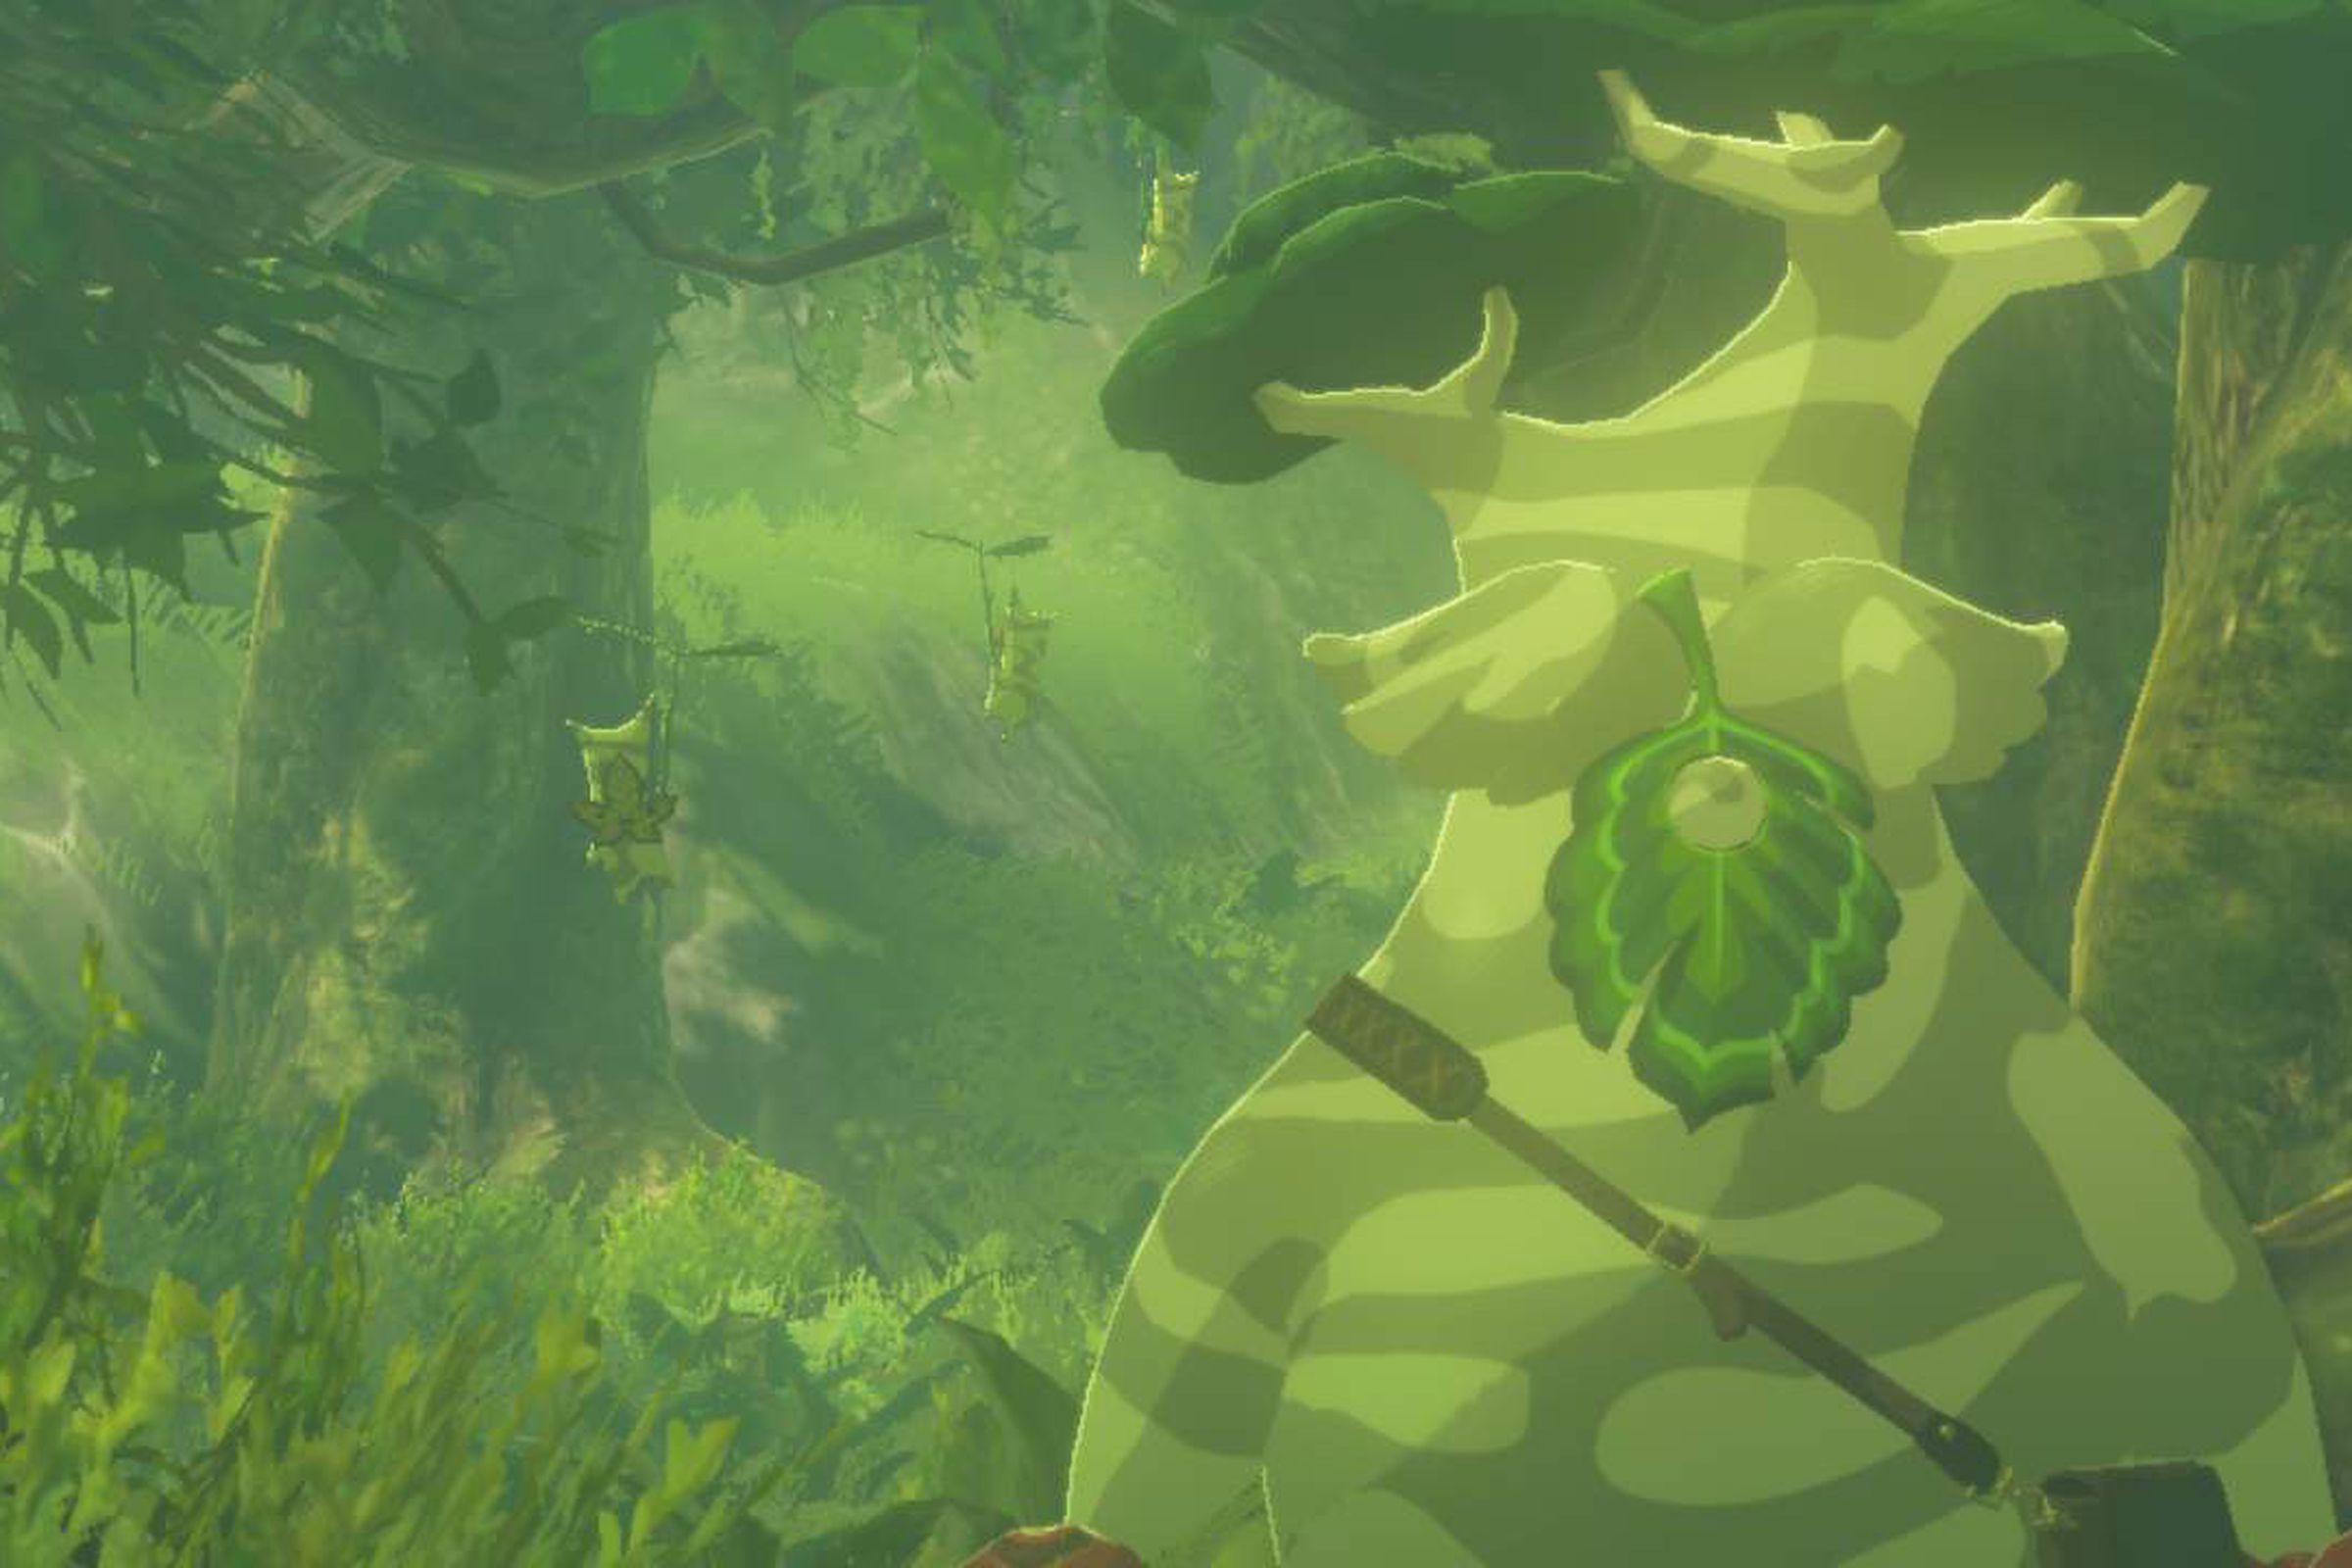 Screenshot from Tears of the Kingdom featuring Korok woodland spirit creatures that look like sentient trees and leaves 